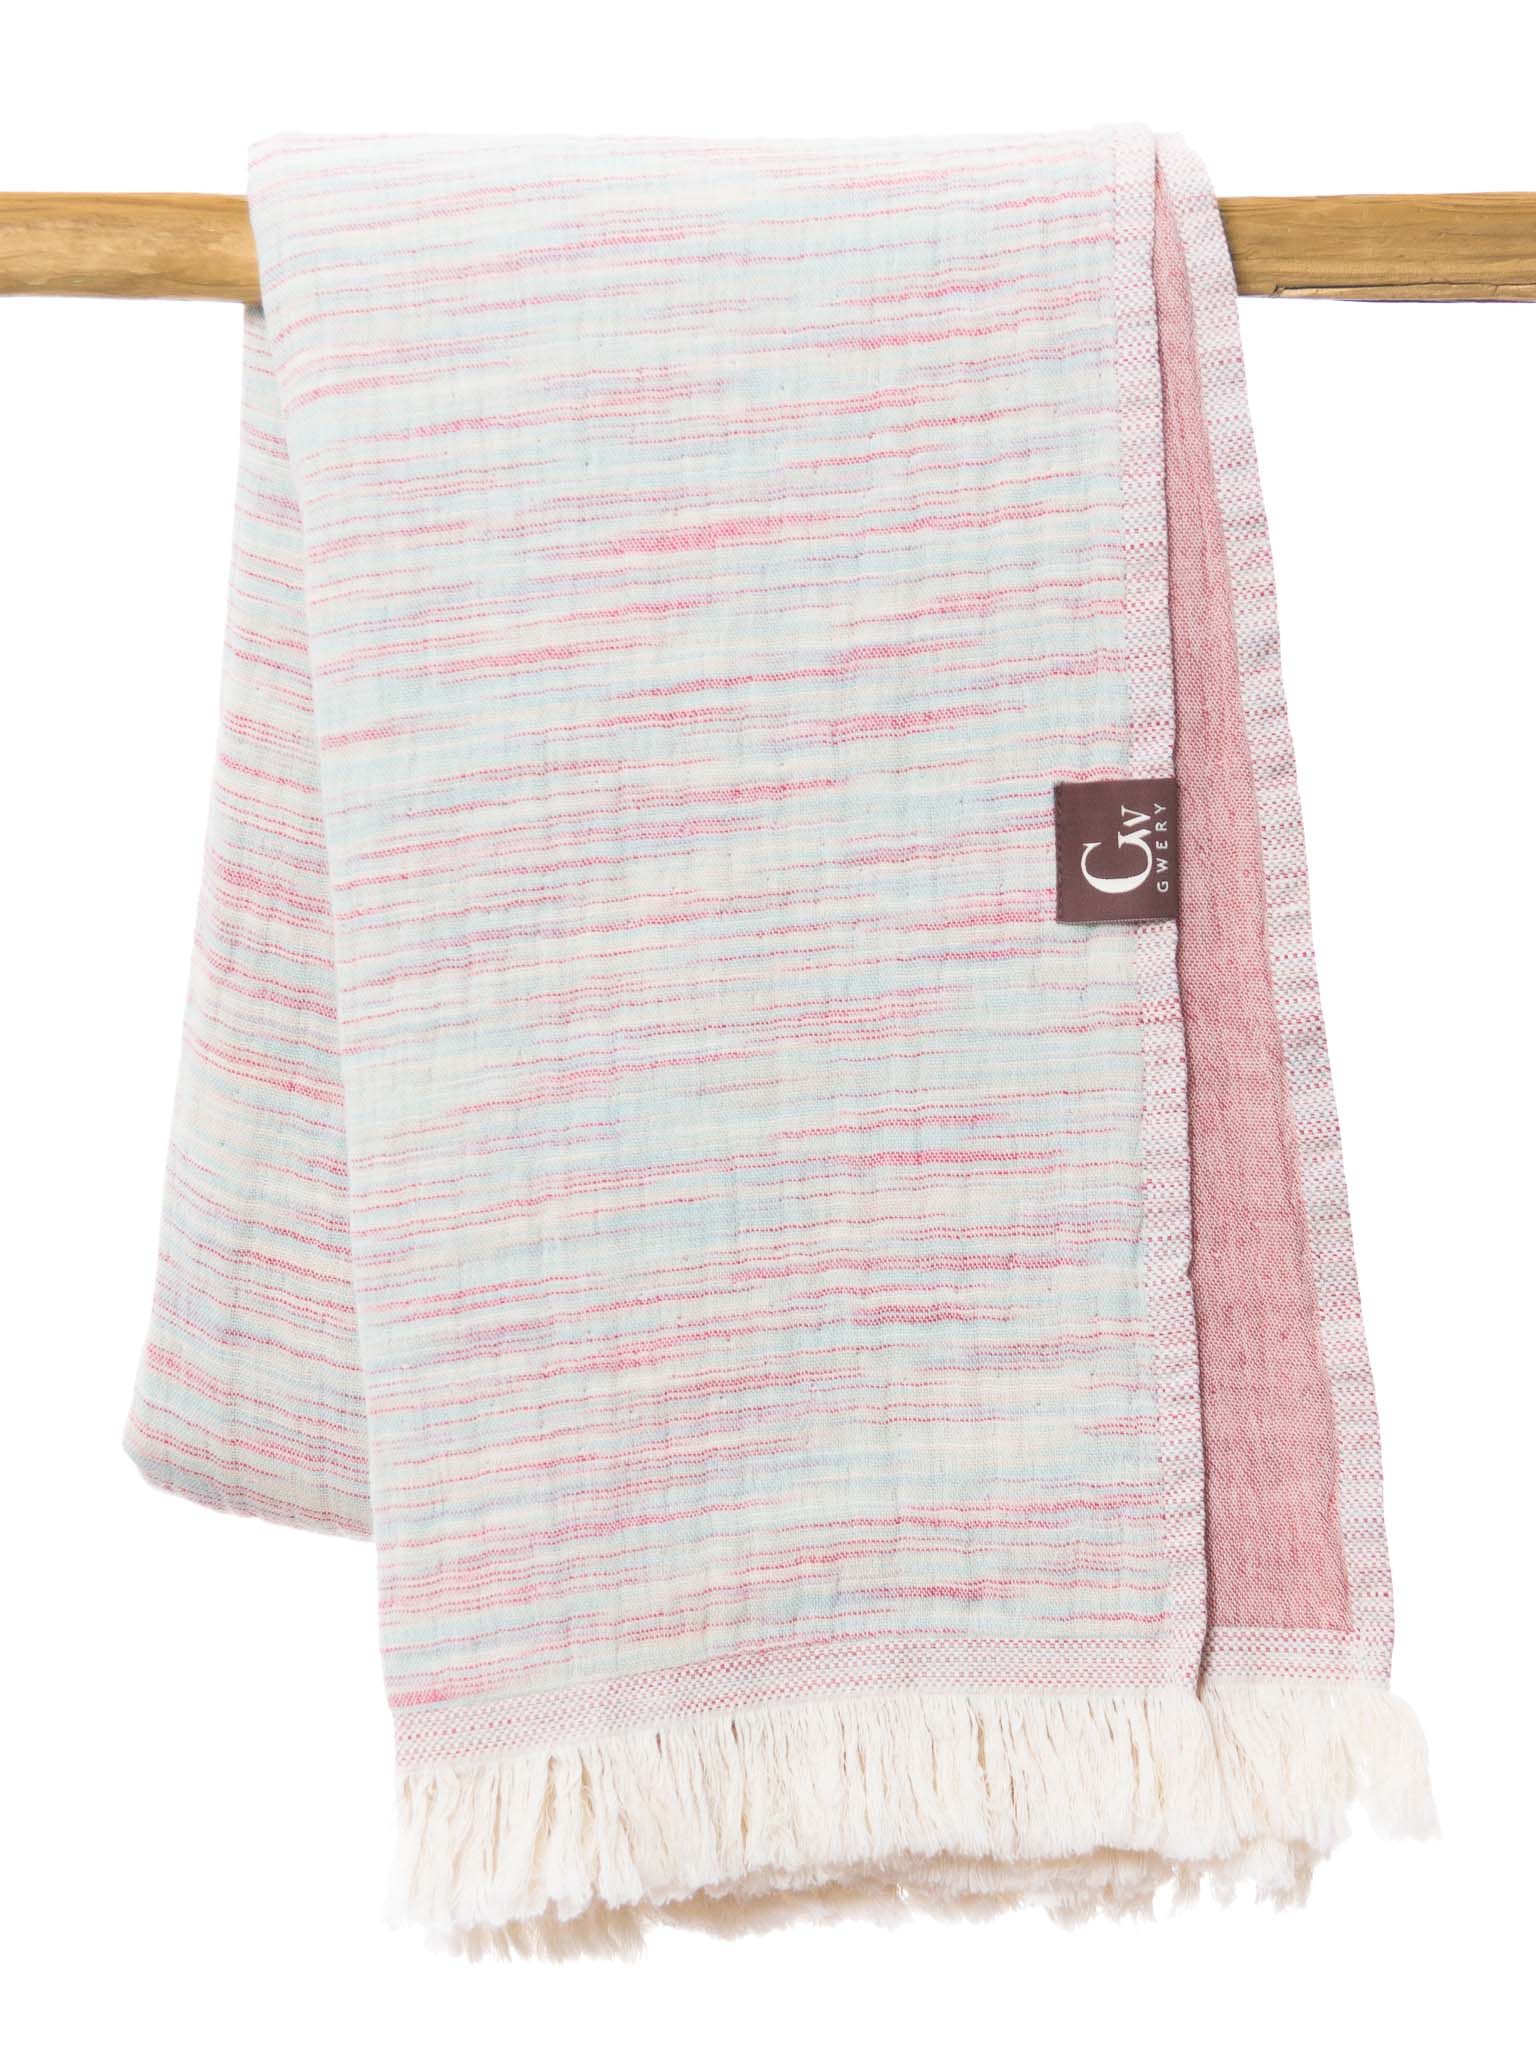 Pink patterned, double sided, beach towel folded